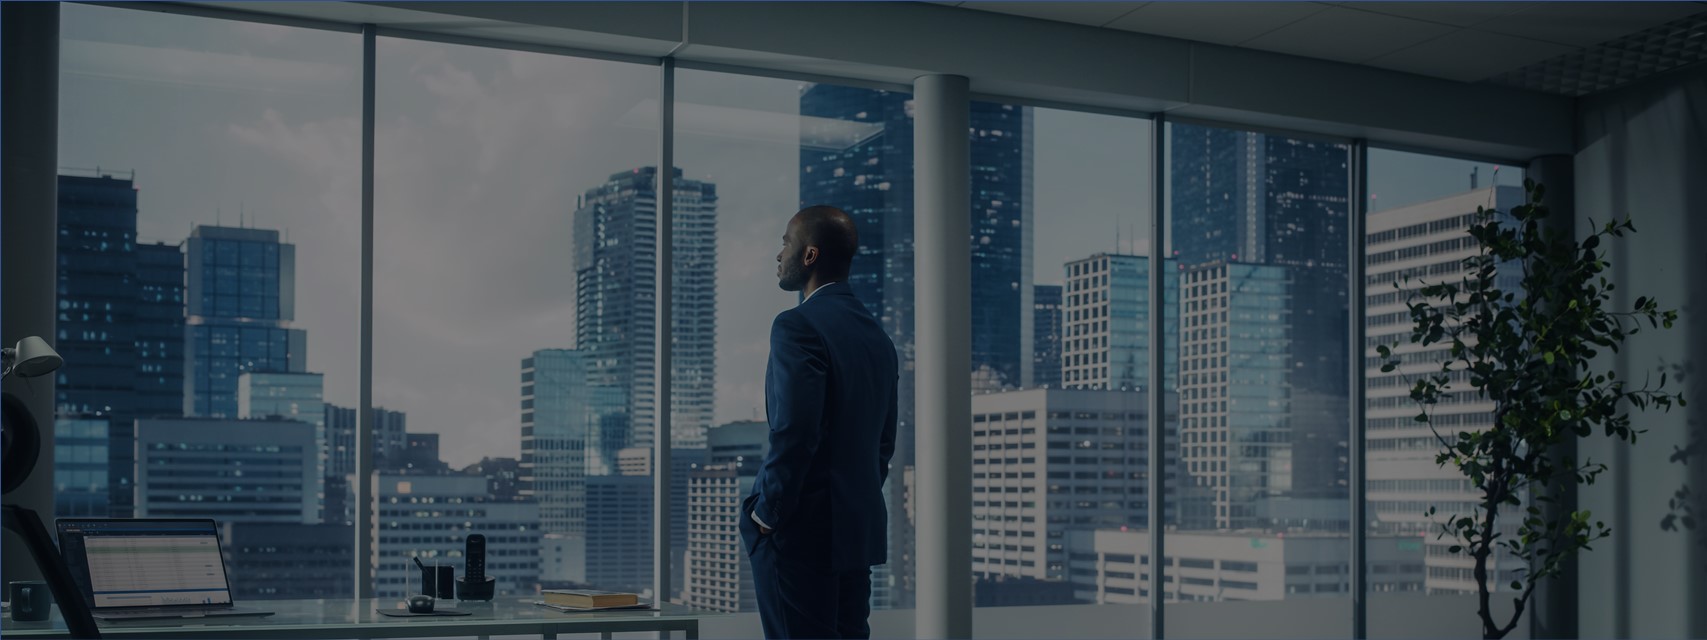 Black executive gazing thoughtfully out window from high floor of office building